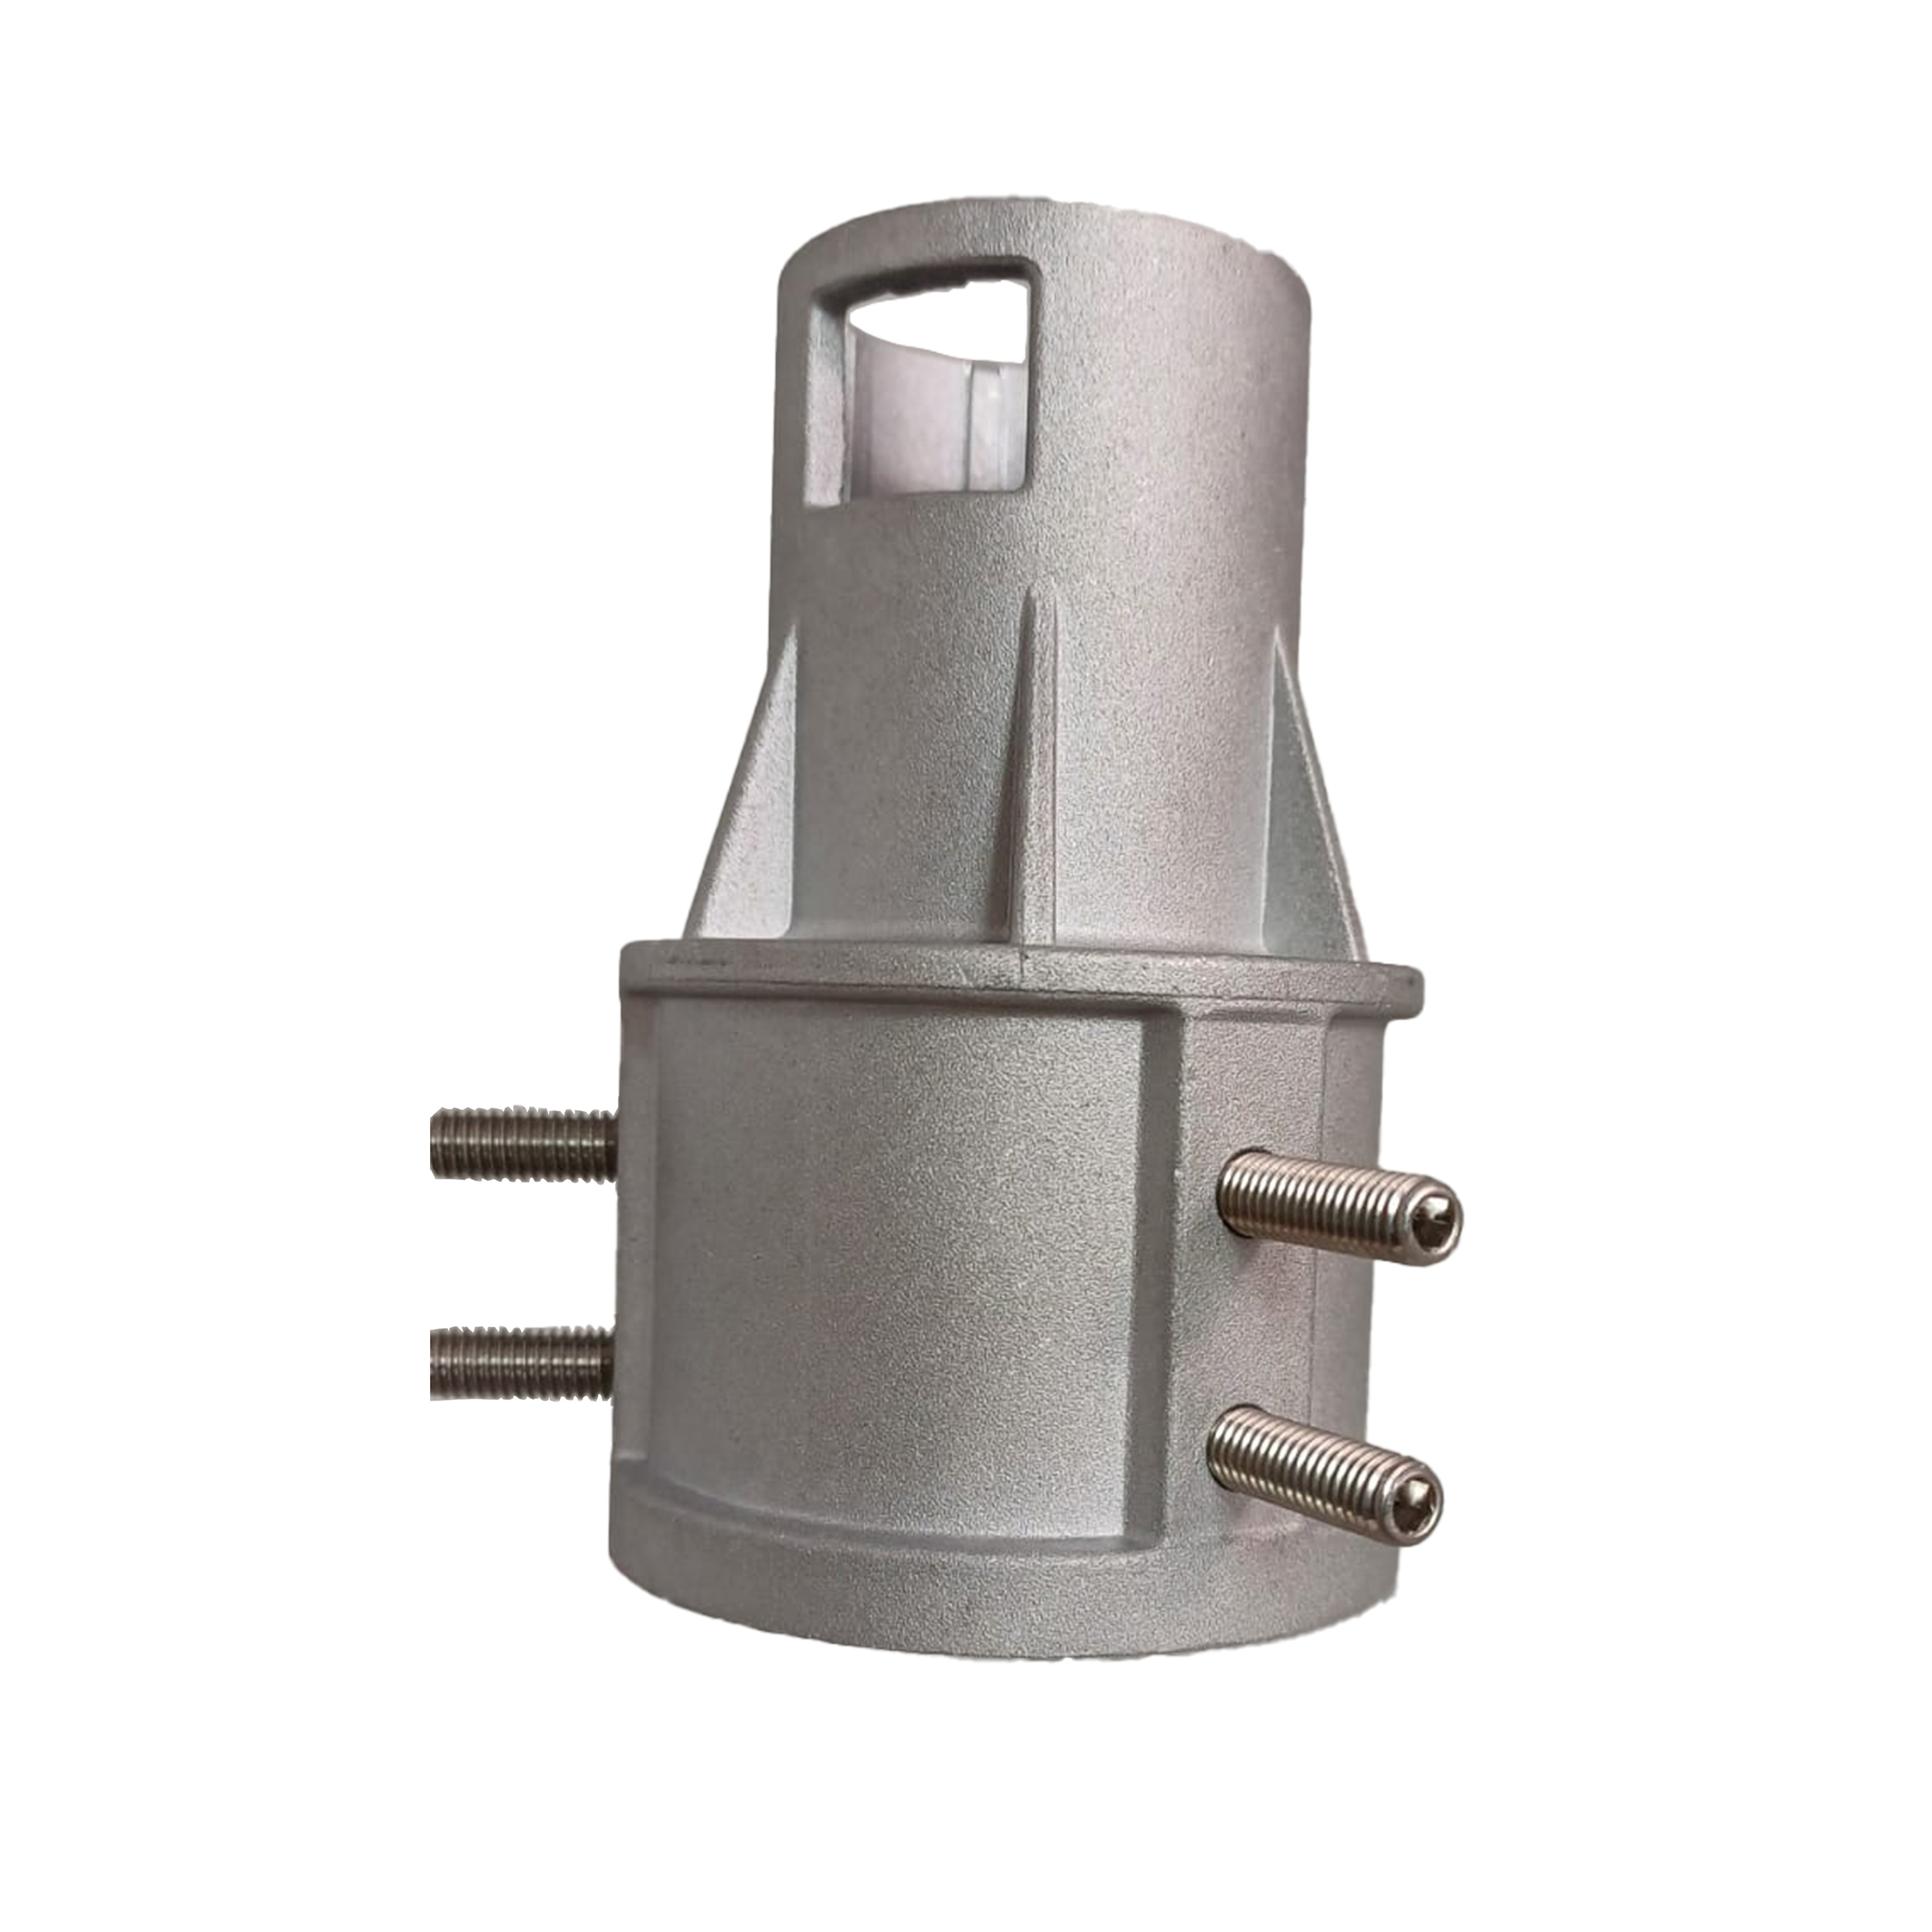 Starlink Socket Adaptor Mount. suits 25 to 50mm mast - Click for more info